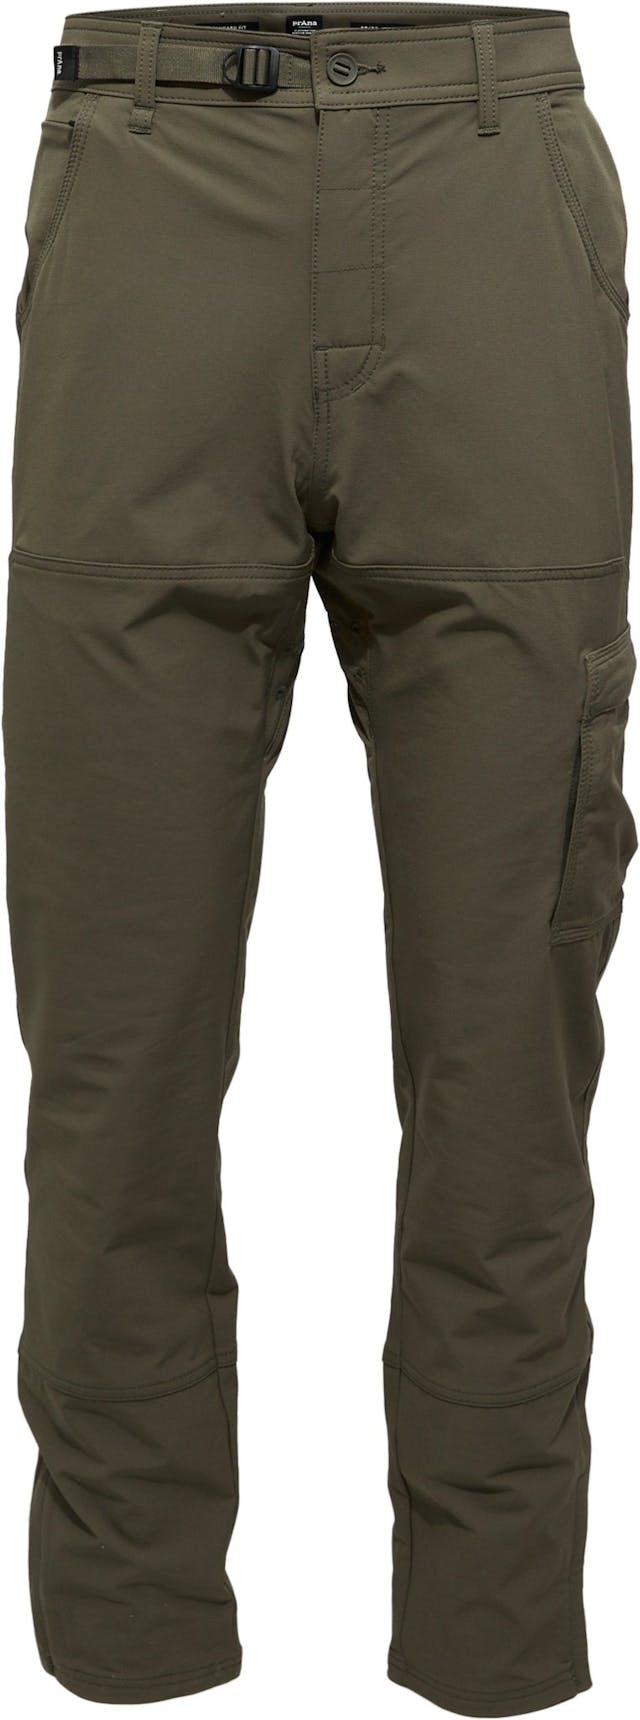 Product image for Stretch Zion AT Pant - Men's